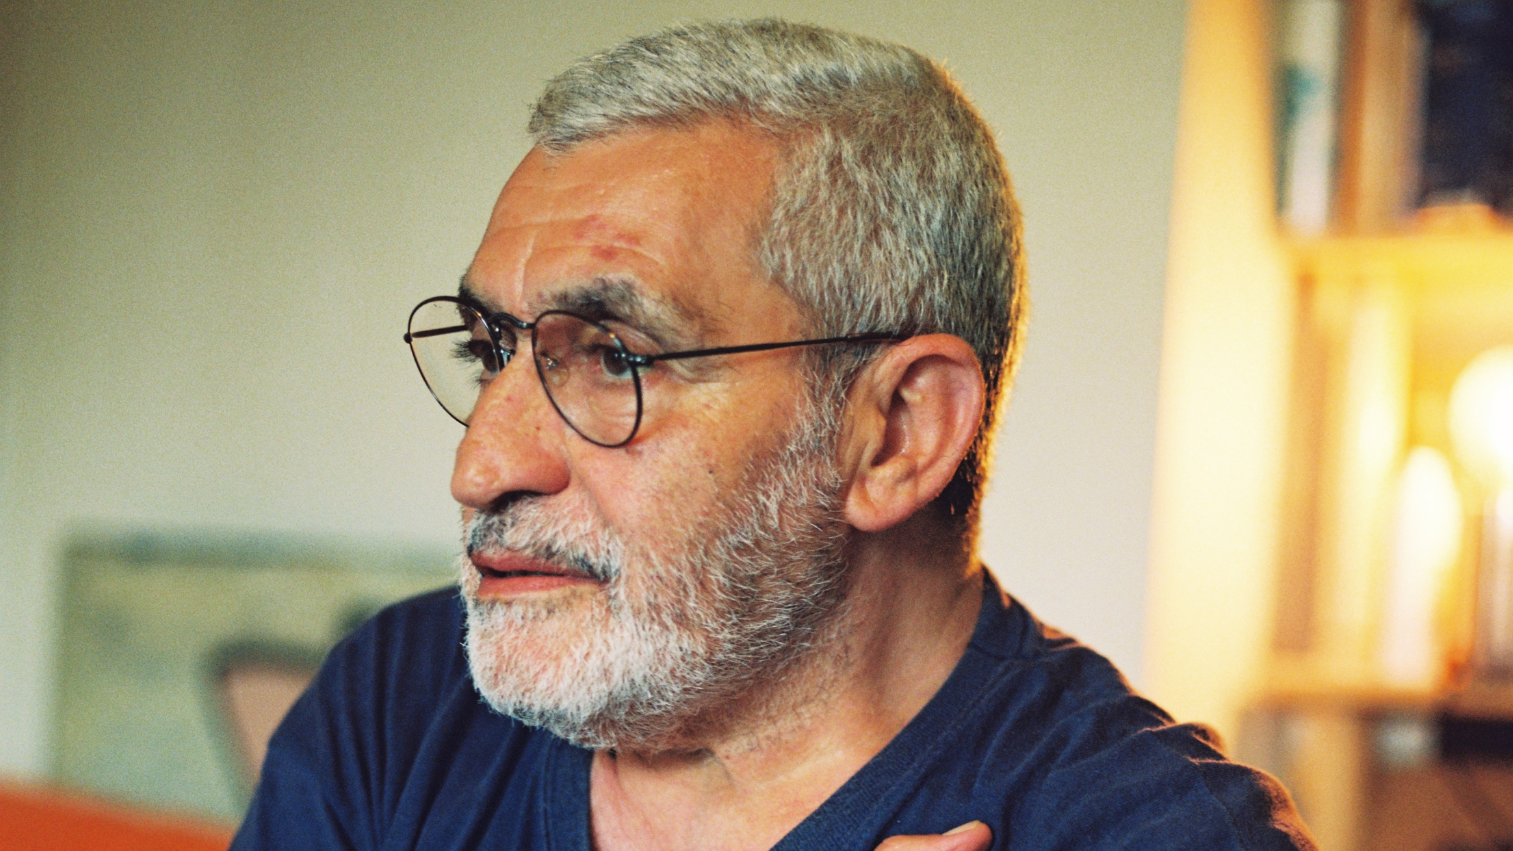 Portrait of an elder man with a grey beard and glasses.